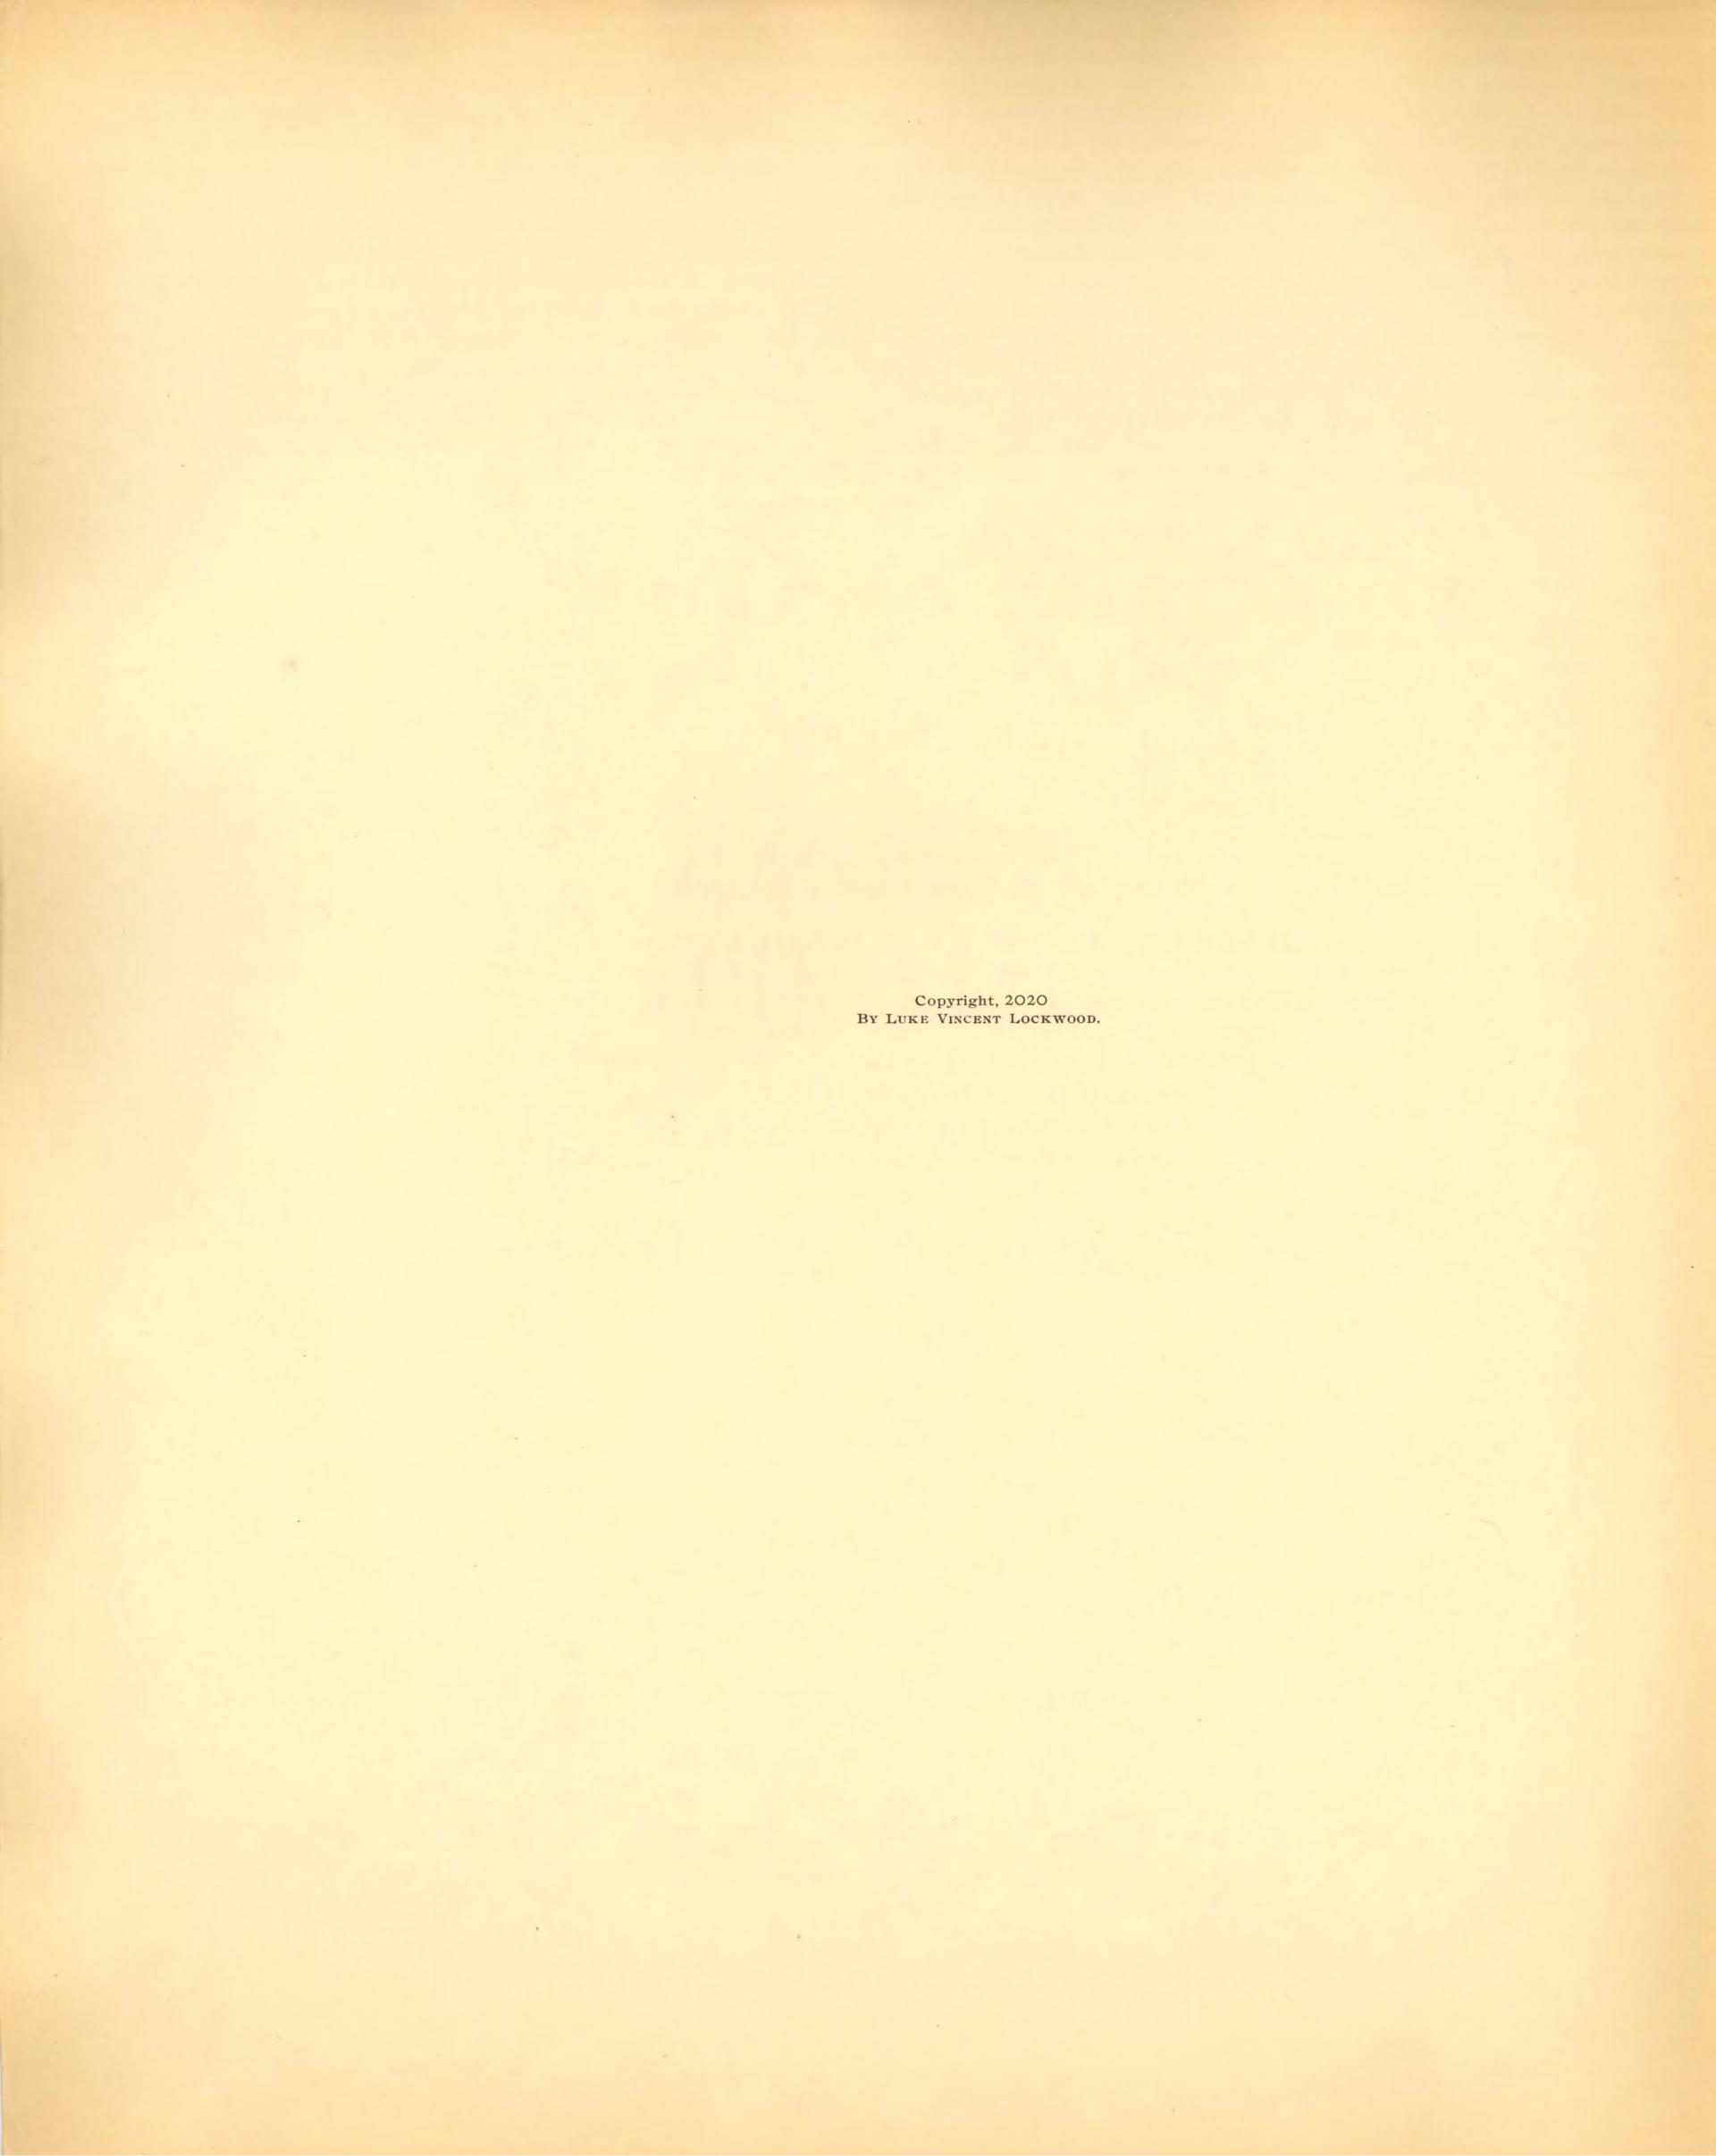 The Pendleton Collection book page: copyright page. Text says "Copyright 2020 by Luke Vincent Lockwood"